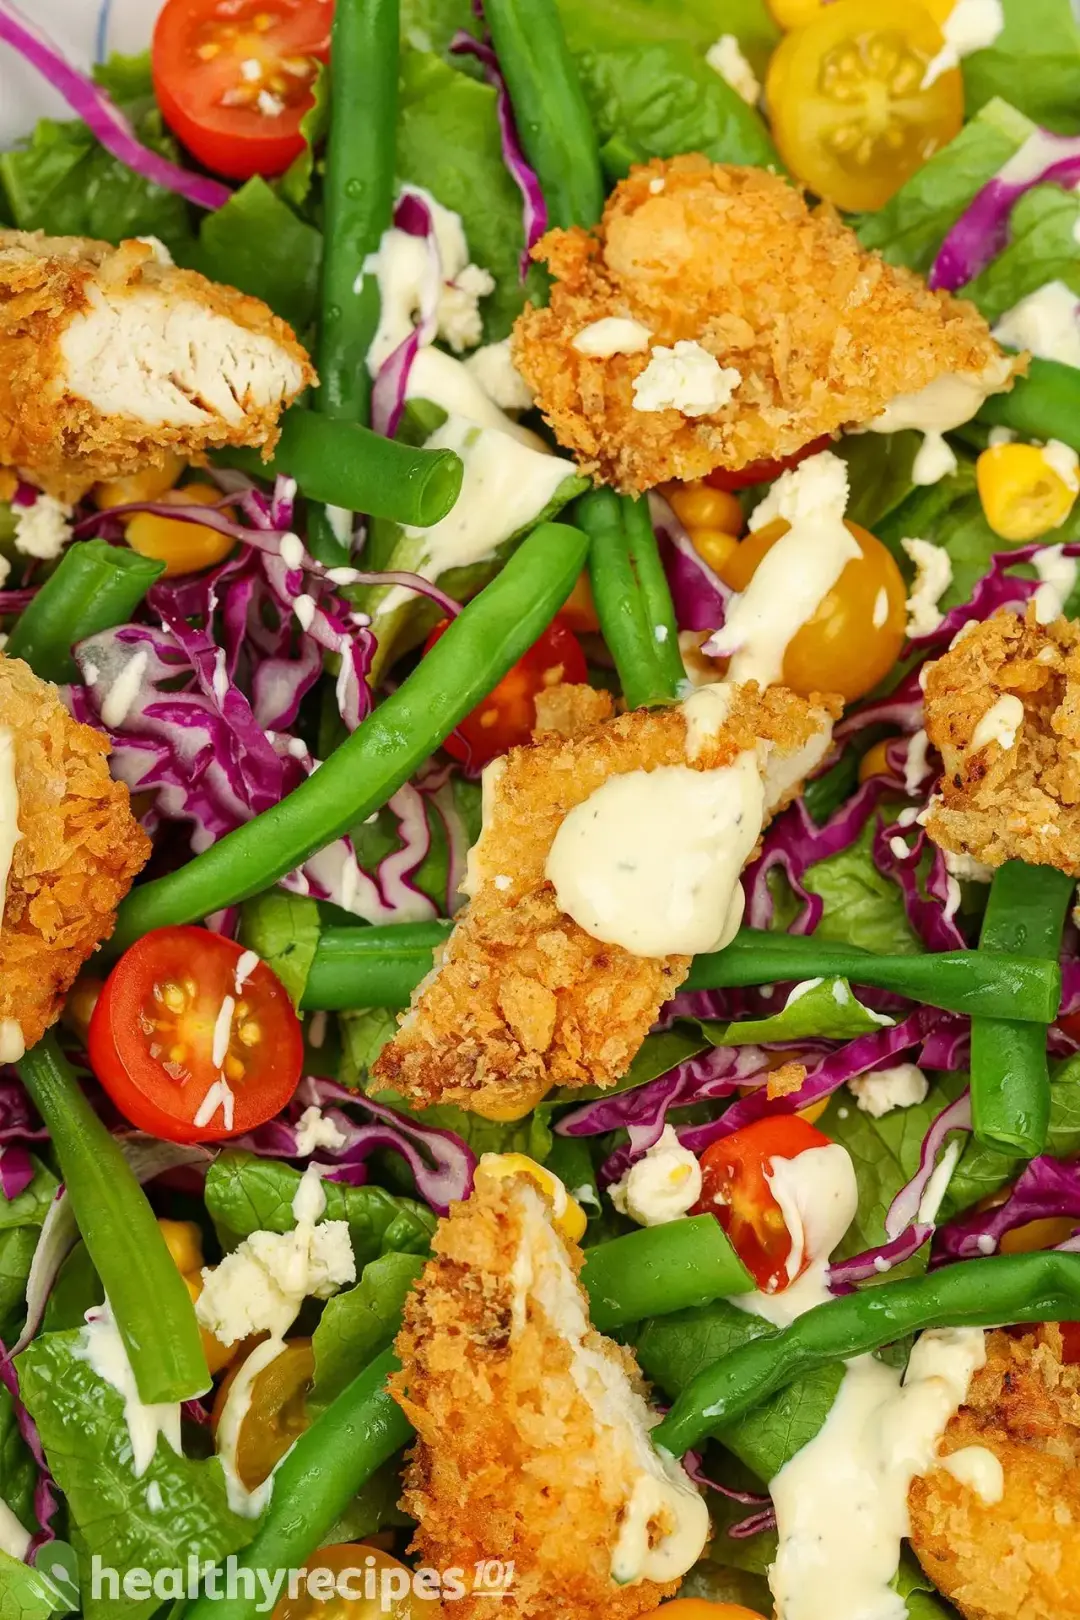 Is Fried Chicken Salad Healthy